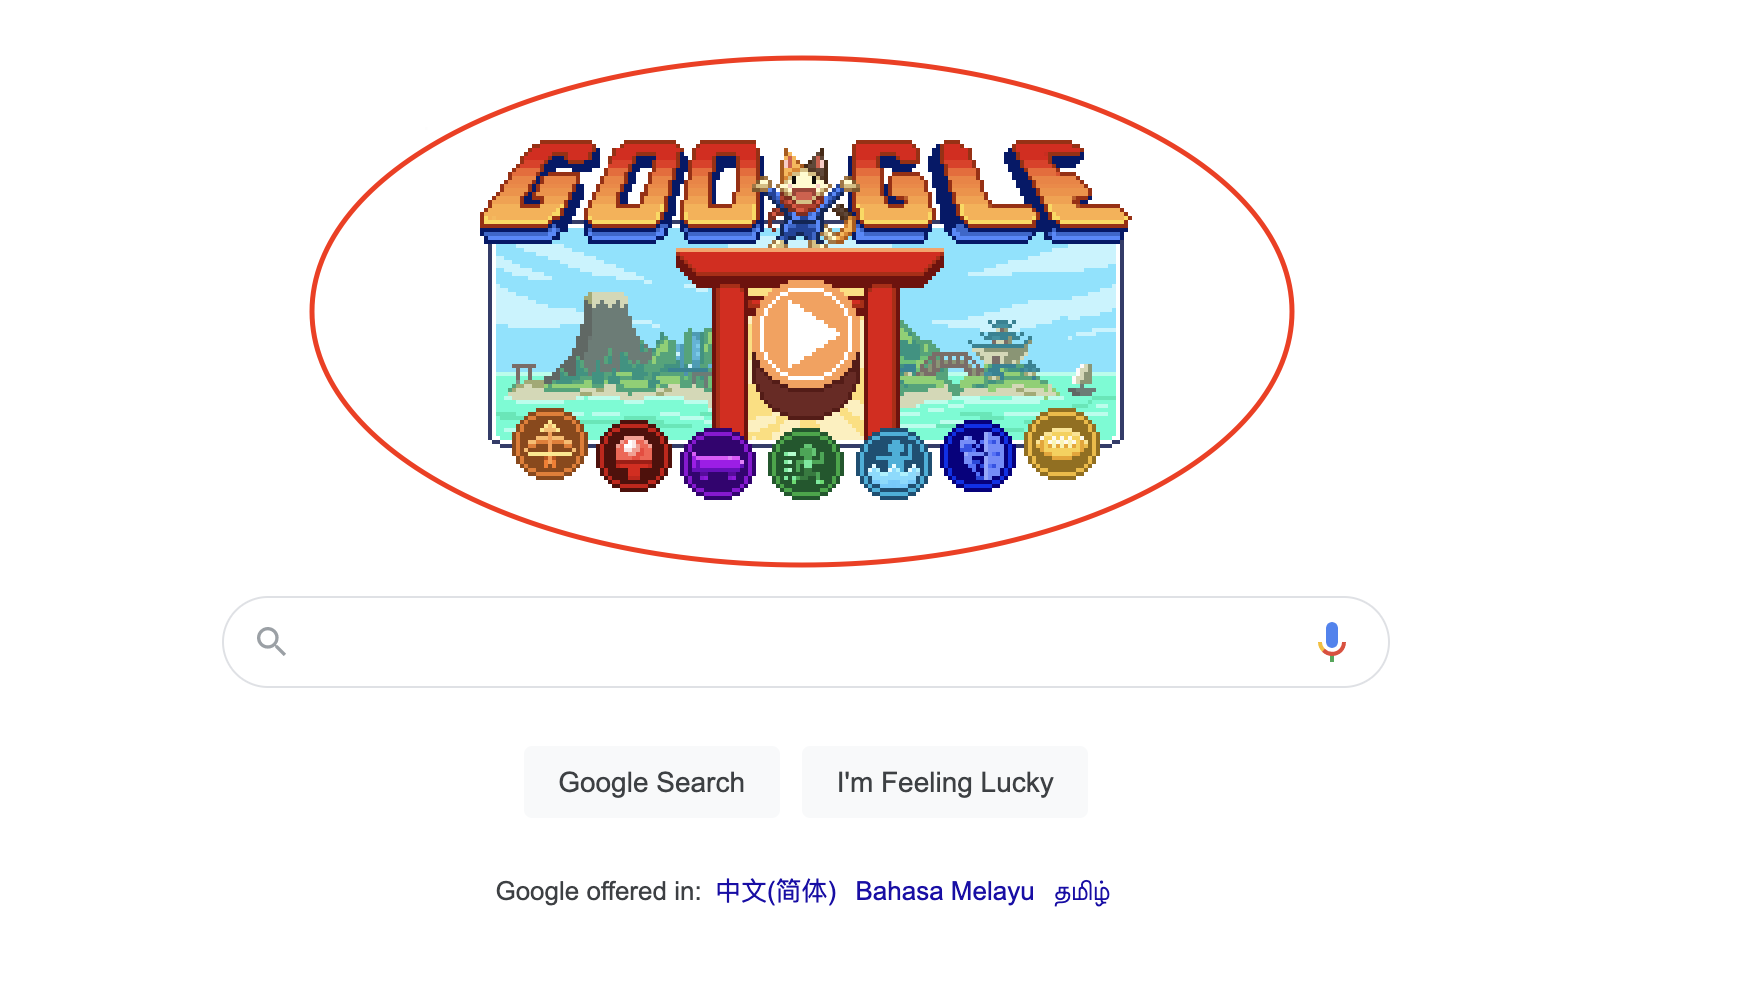 Today's Google Doodle is an Olympic-inspired video game and it's